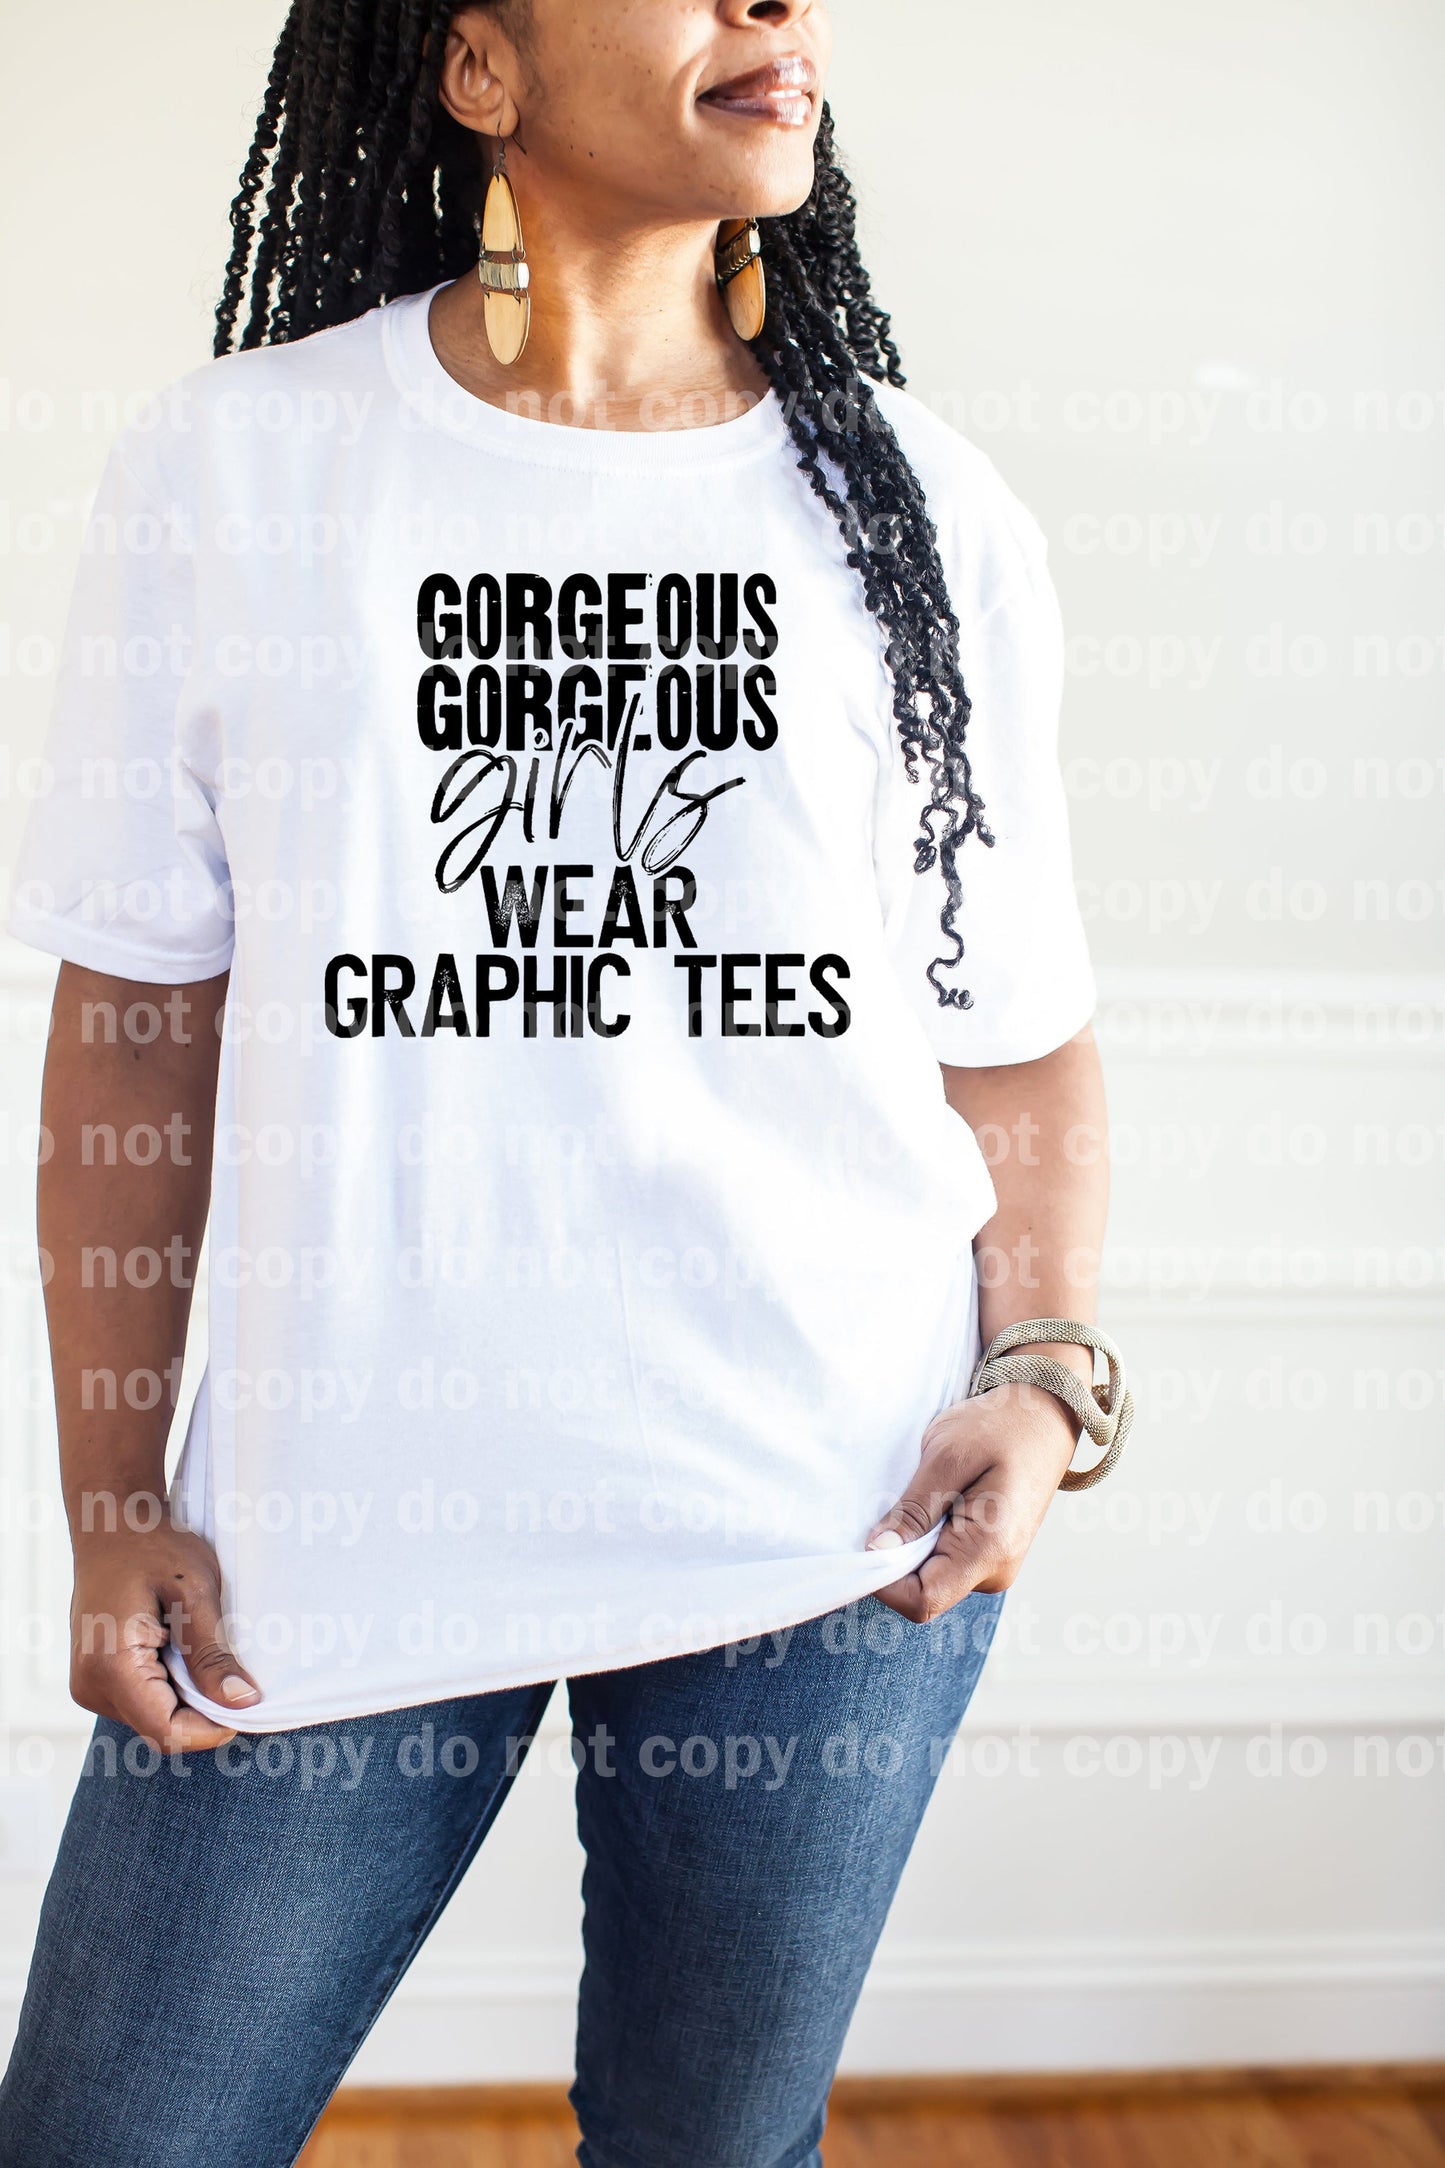 Gorgeous Gorgeous Girls Wear Graphic Tees Dream Print or Sublimation Print